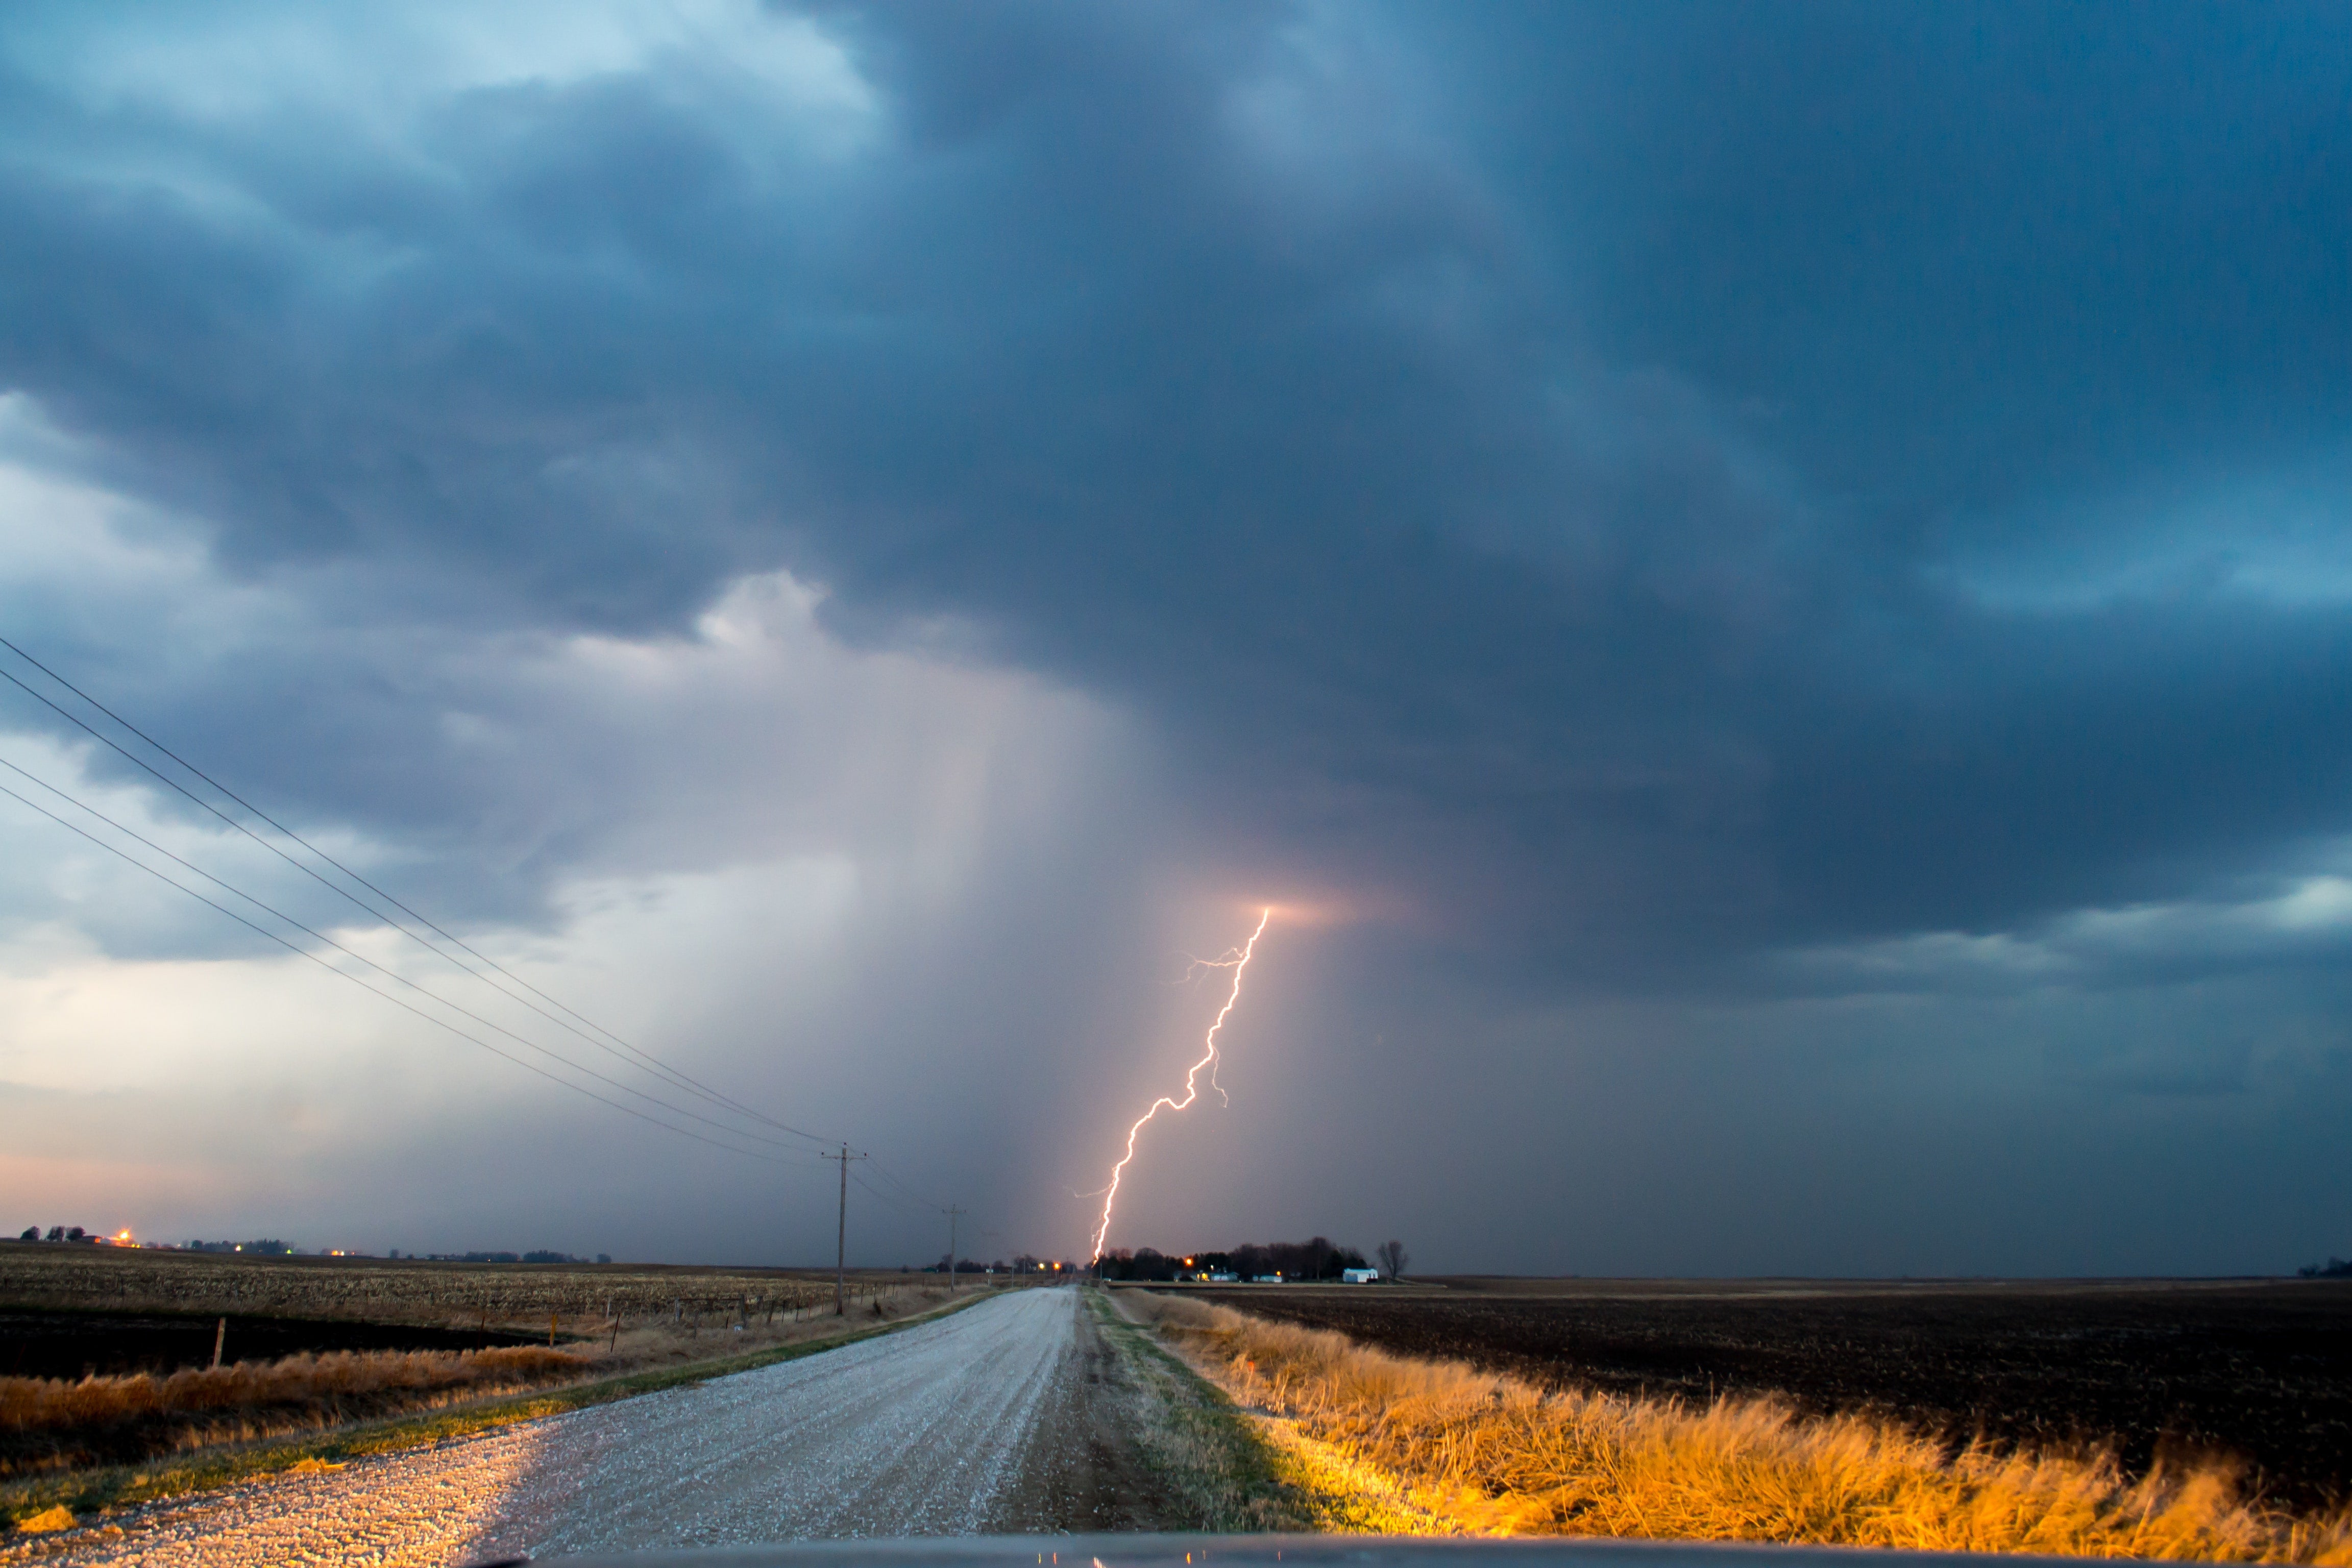 Staying Safe During Severe Weather: Tips for Home and Family